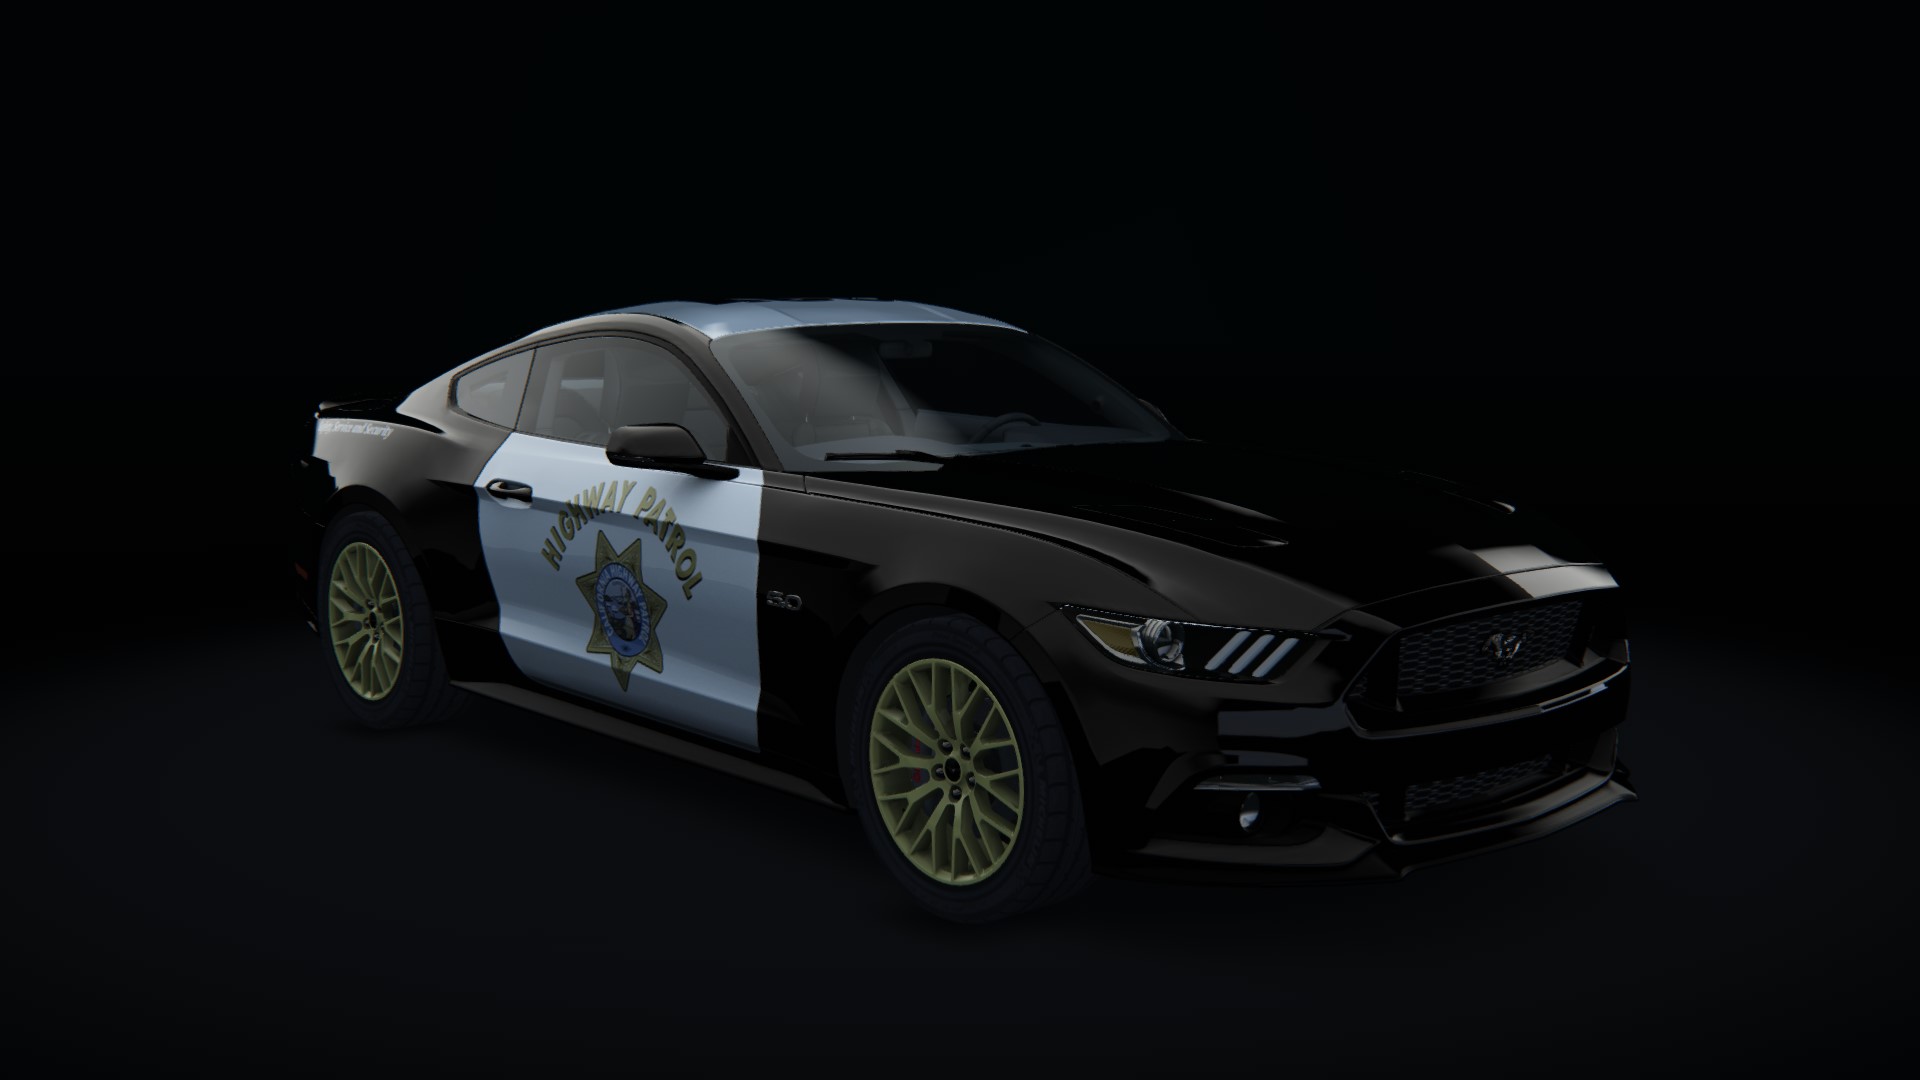 Ford Mustang 2015, skin chp_unit_687